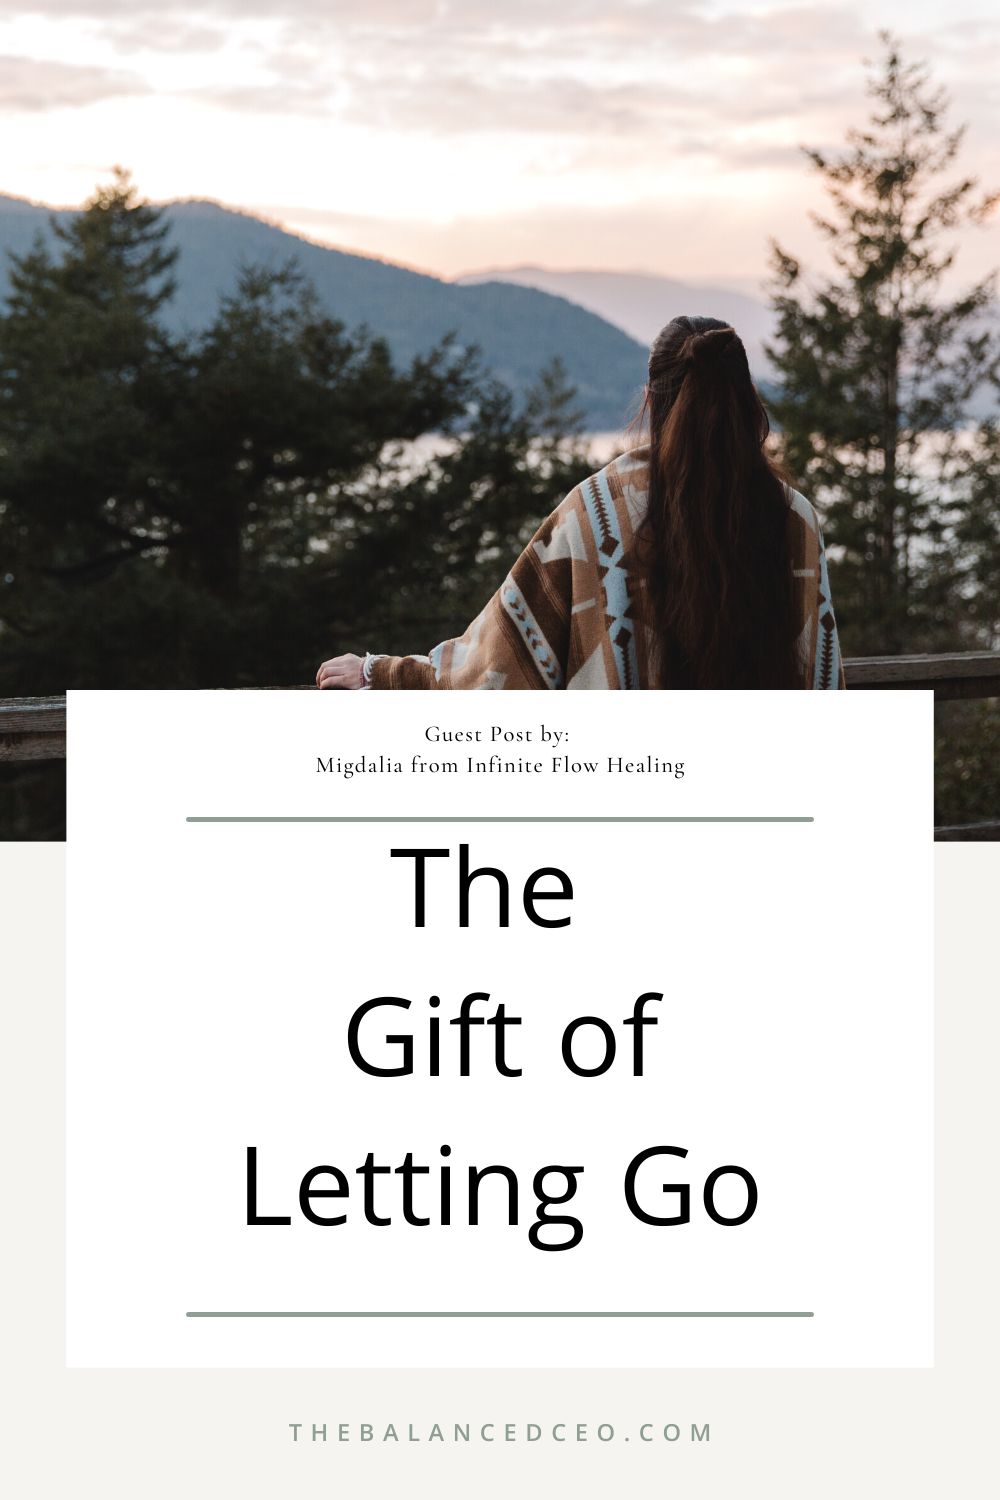 The Gift of Letting Go